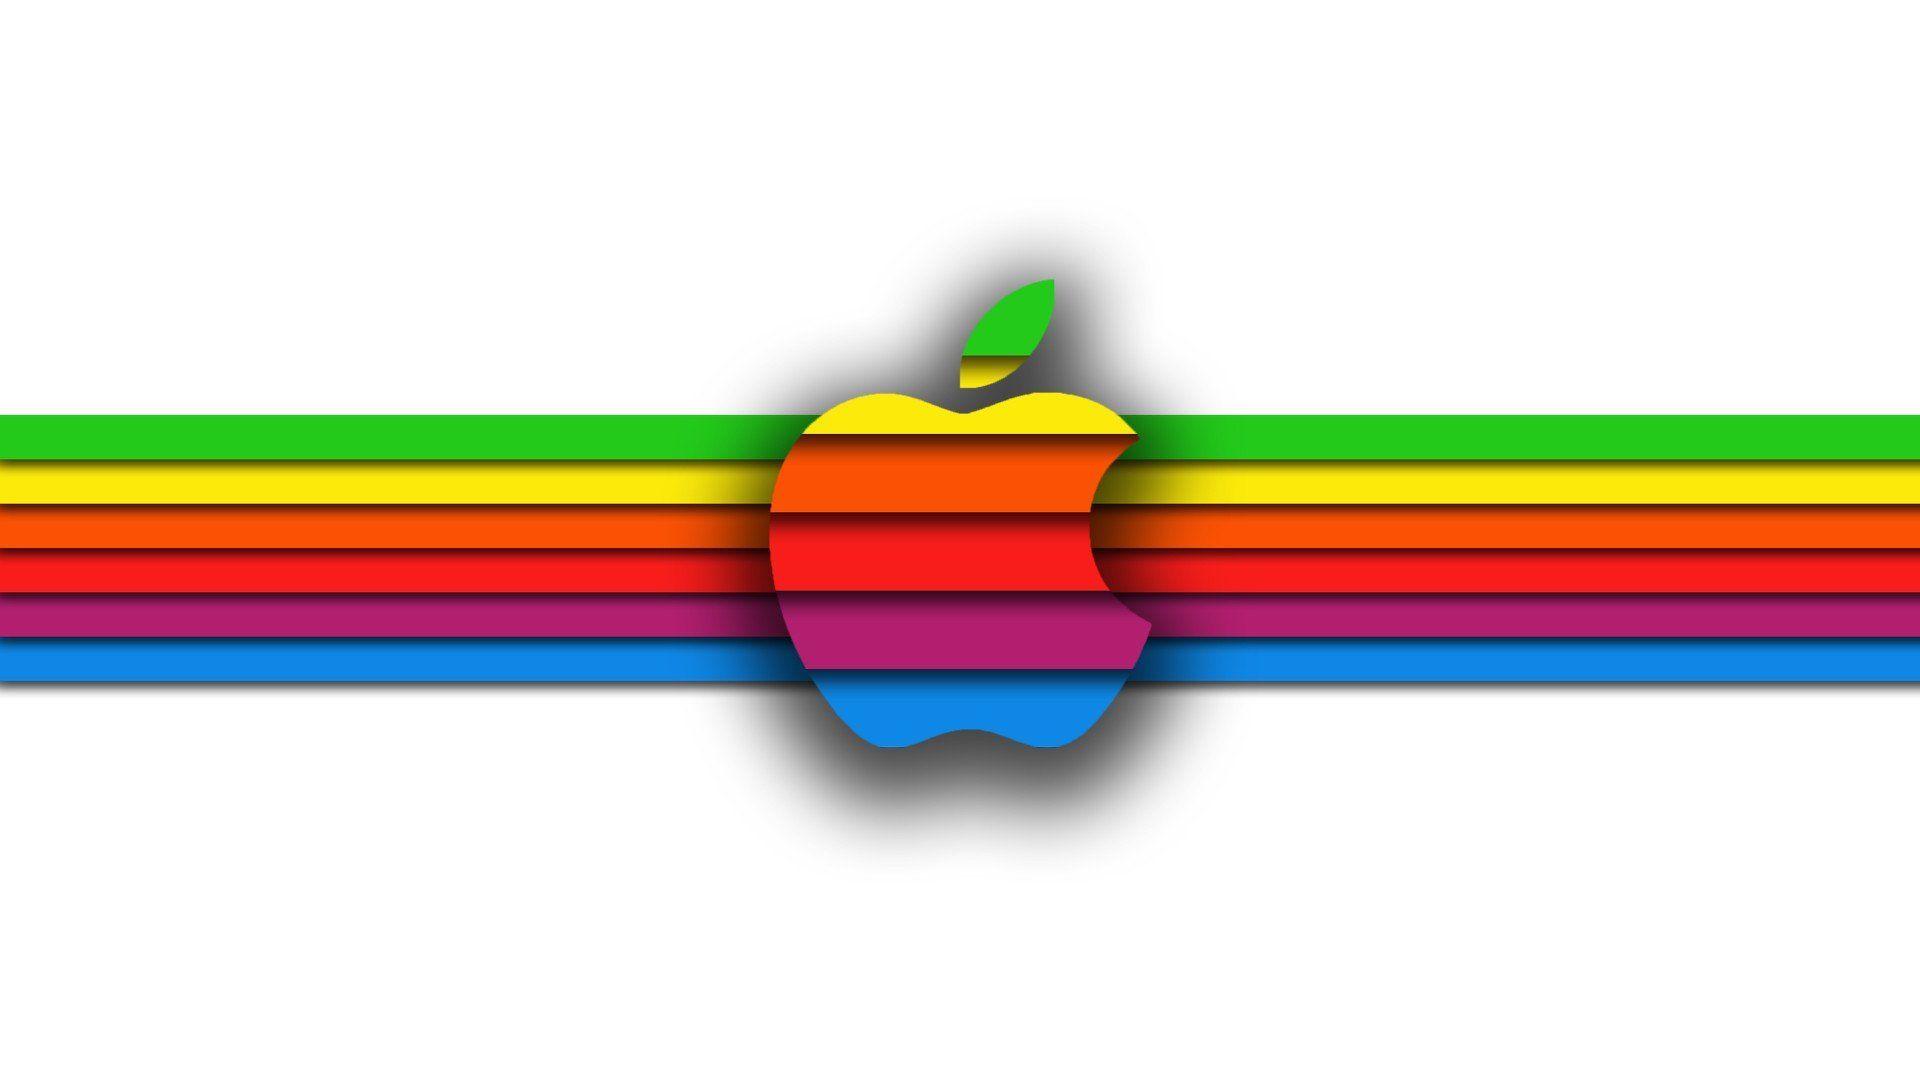 Multi Color World Logo - Wallpaper : 1920x1080 px, abstract, apple, colors, logos ...